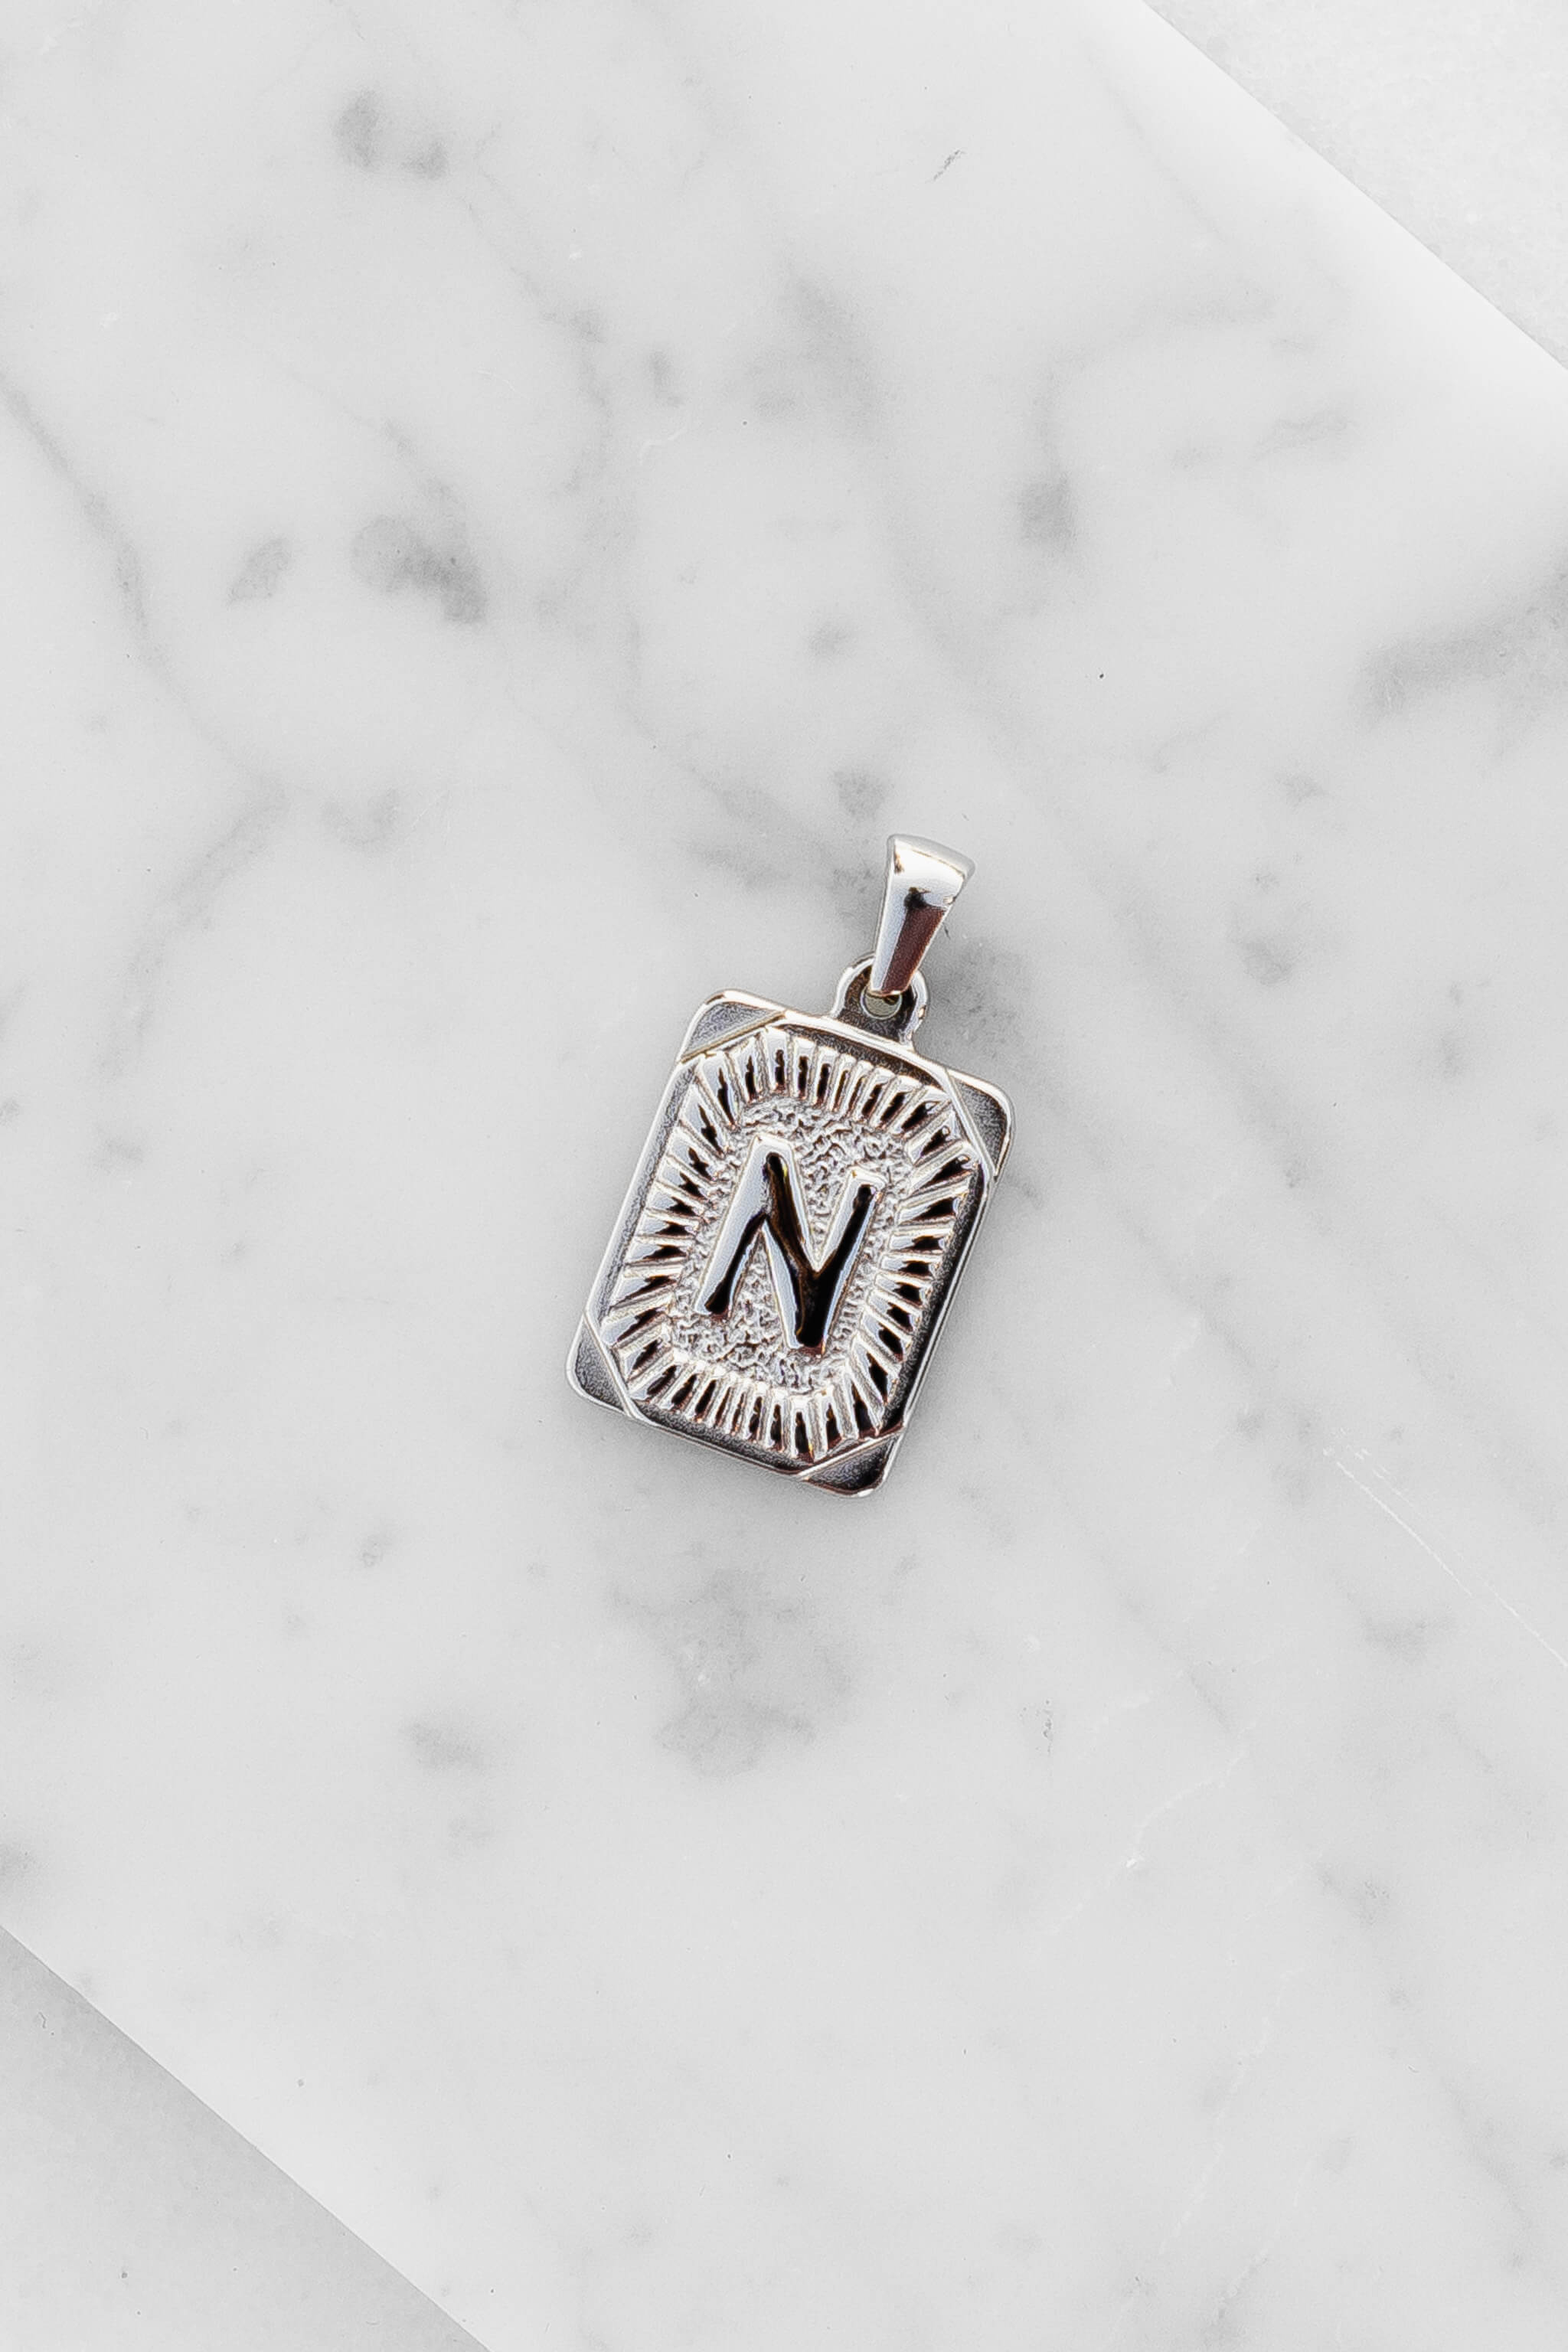 Silver Monogram Letter "N" Charm laying on a marble